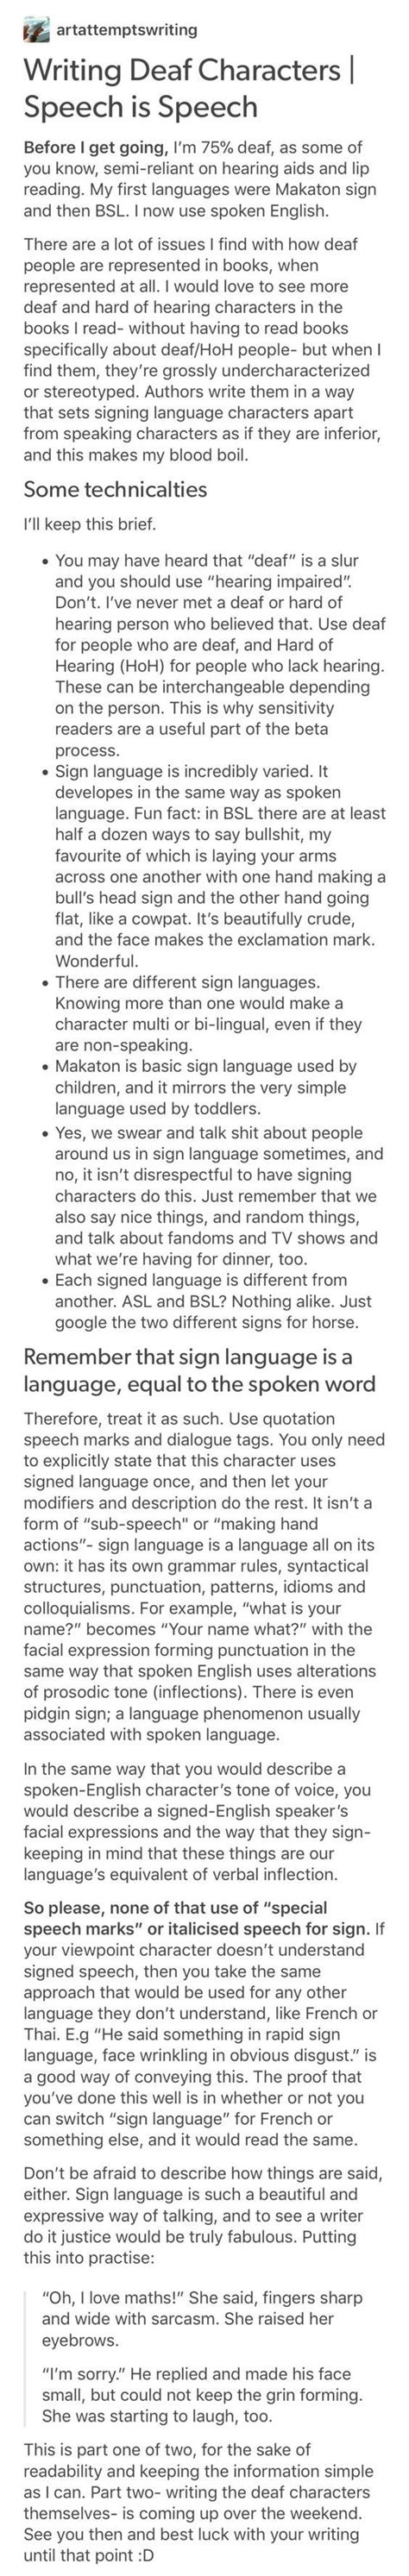 This Is A Fantastic Post About How To Write A Deaf Character From A